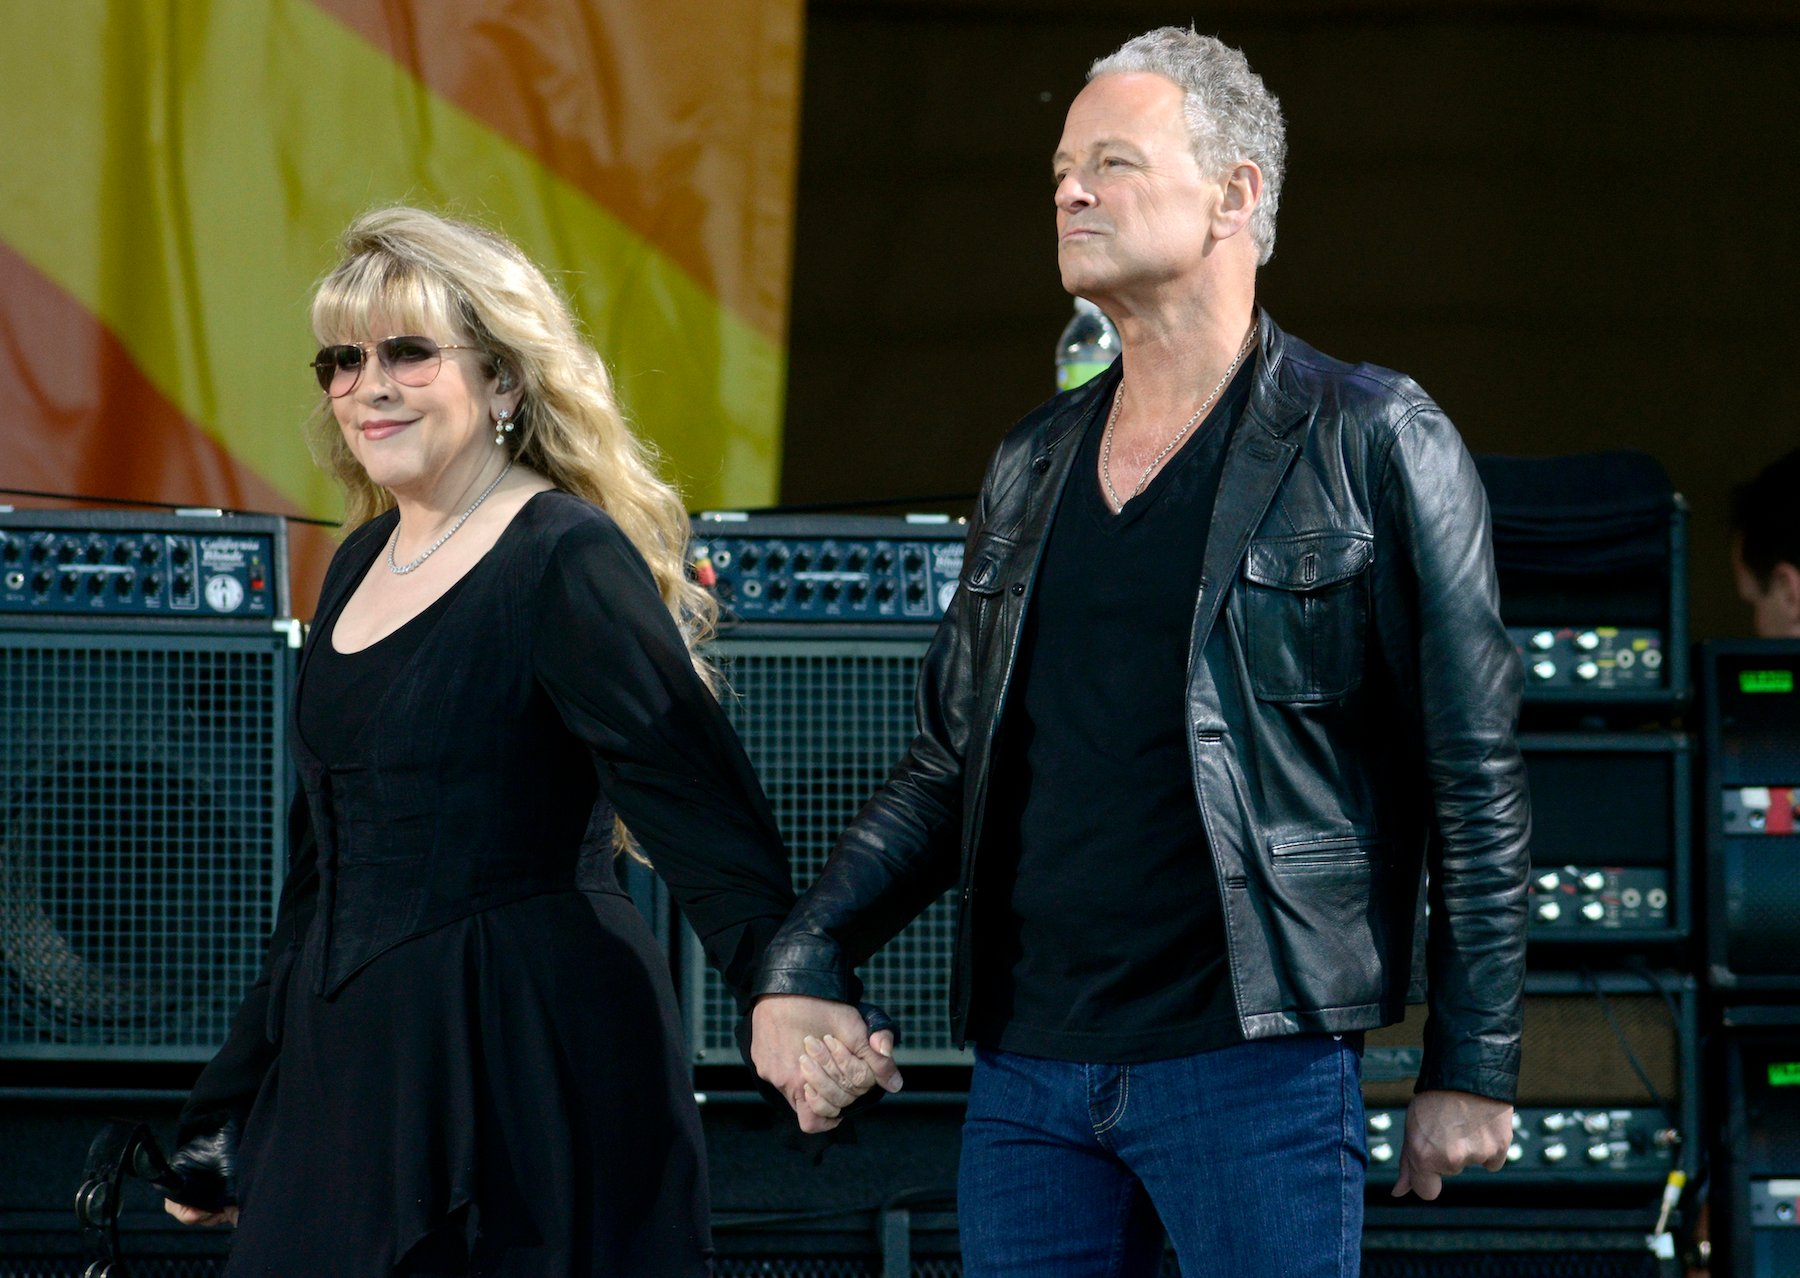 Stevie Nicks and Lindsey Buckingham of Fleetwood Mac take the stage at the 2013 New Orleans Jazz & Heritage Festival